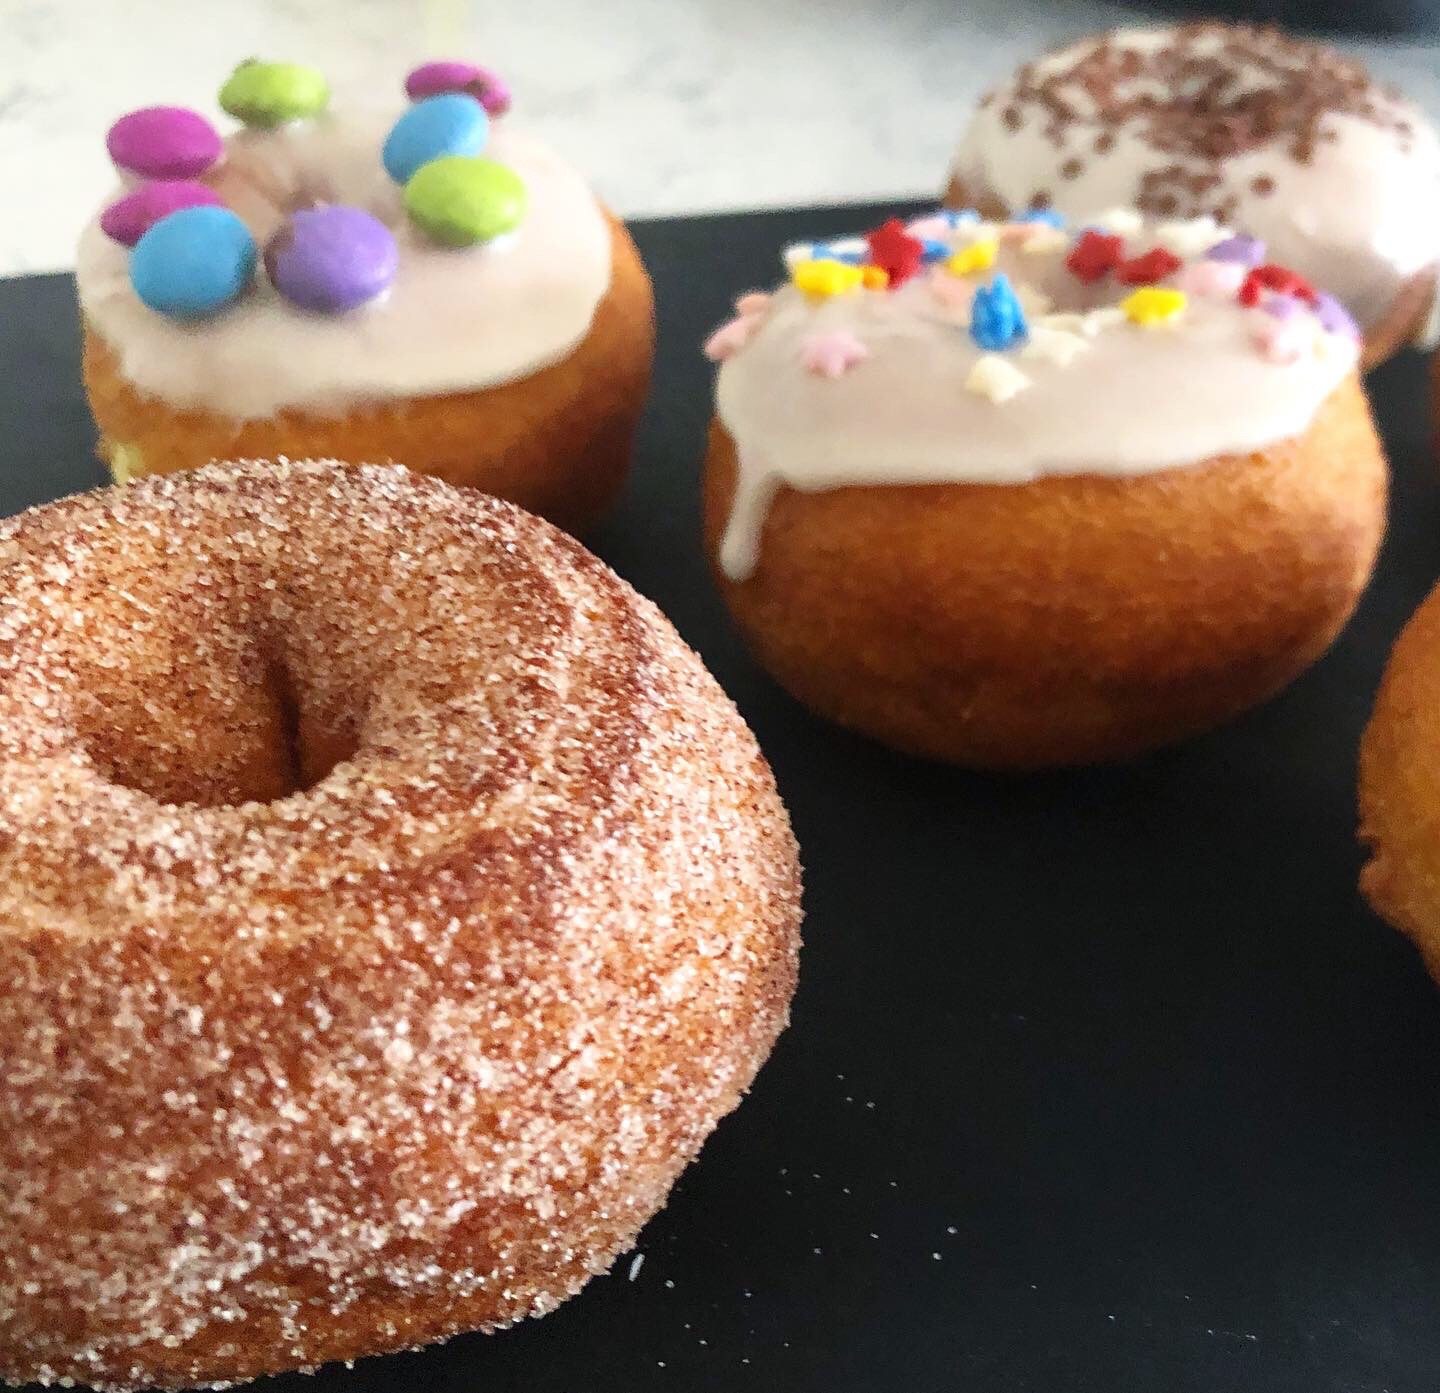 Donuts with varying toppings are on a black cutting board. The closest one is tossed in cinnamon sugar, and the others are frosted with white icing. Photo by Alyssa Buckley.